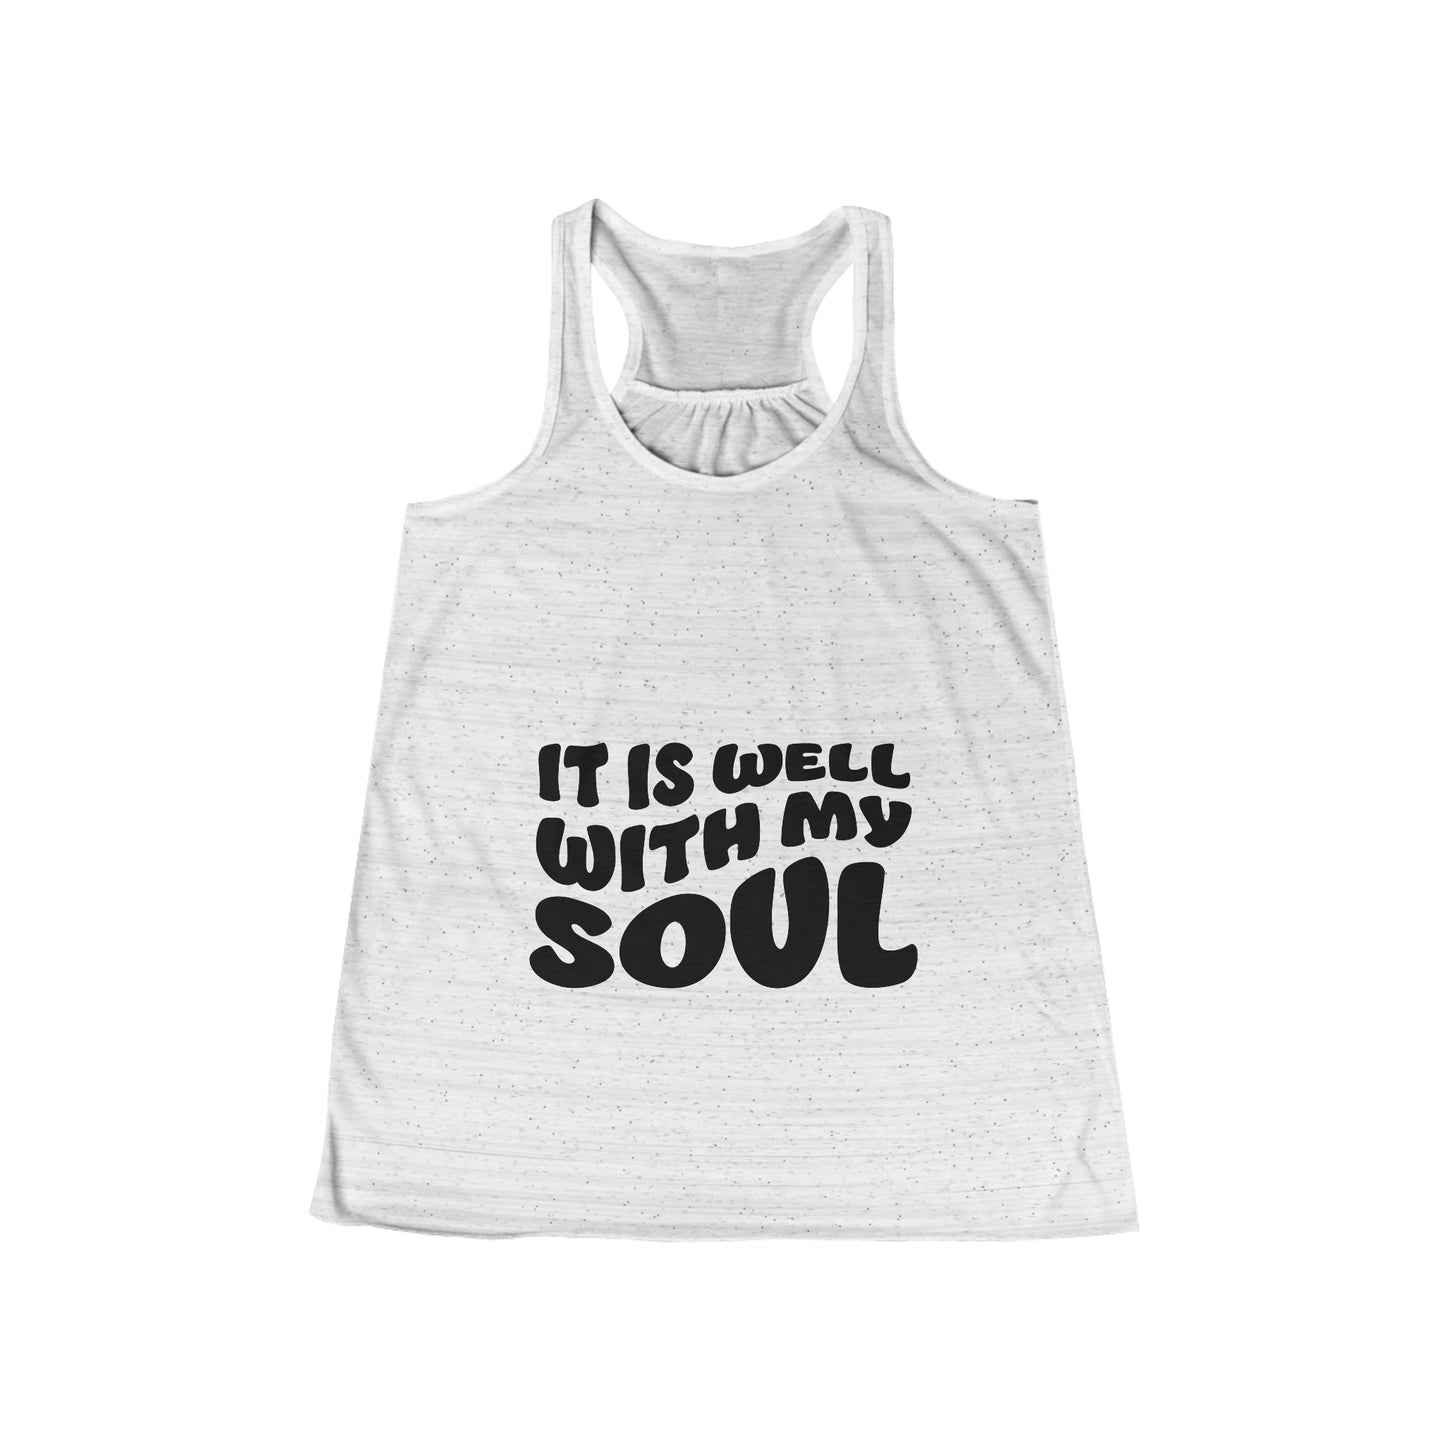 Well With my Soul Tank - B